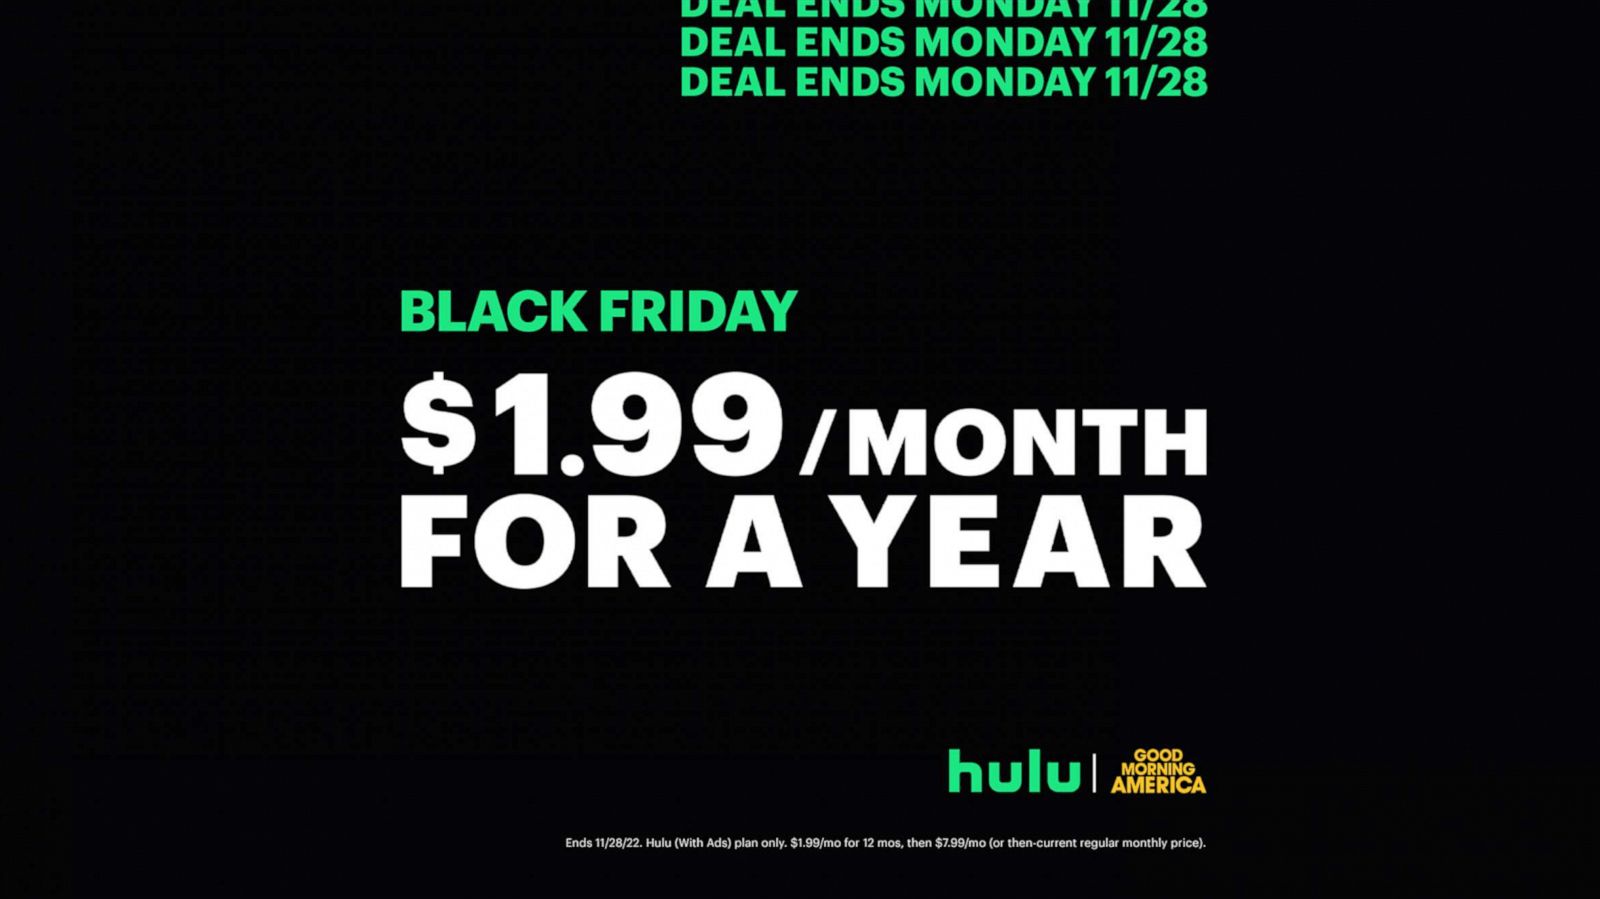 Last chance for Cyber Monday! Get Hulu for $1.99 per month for a